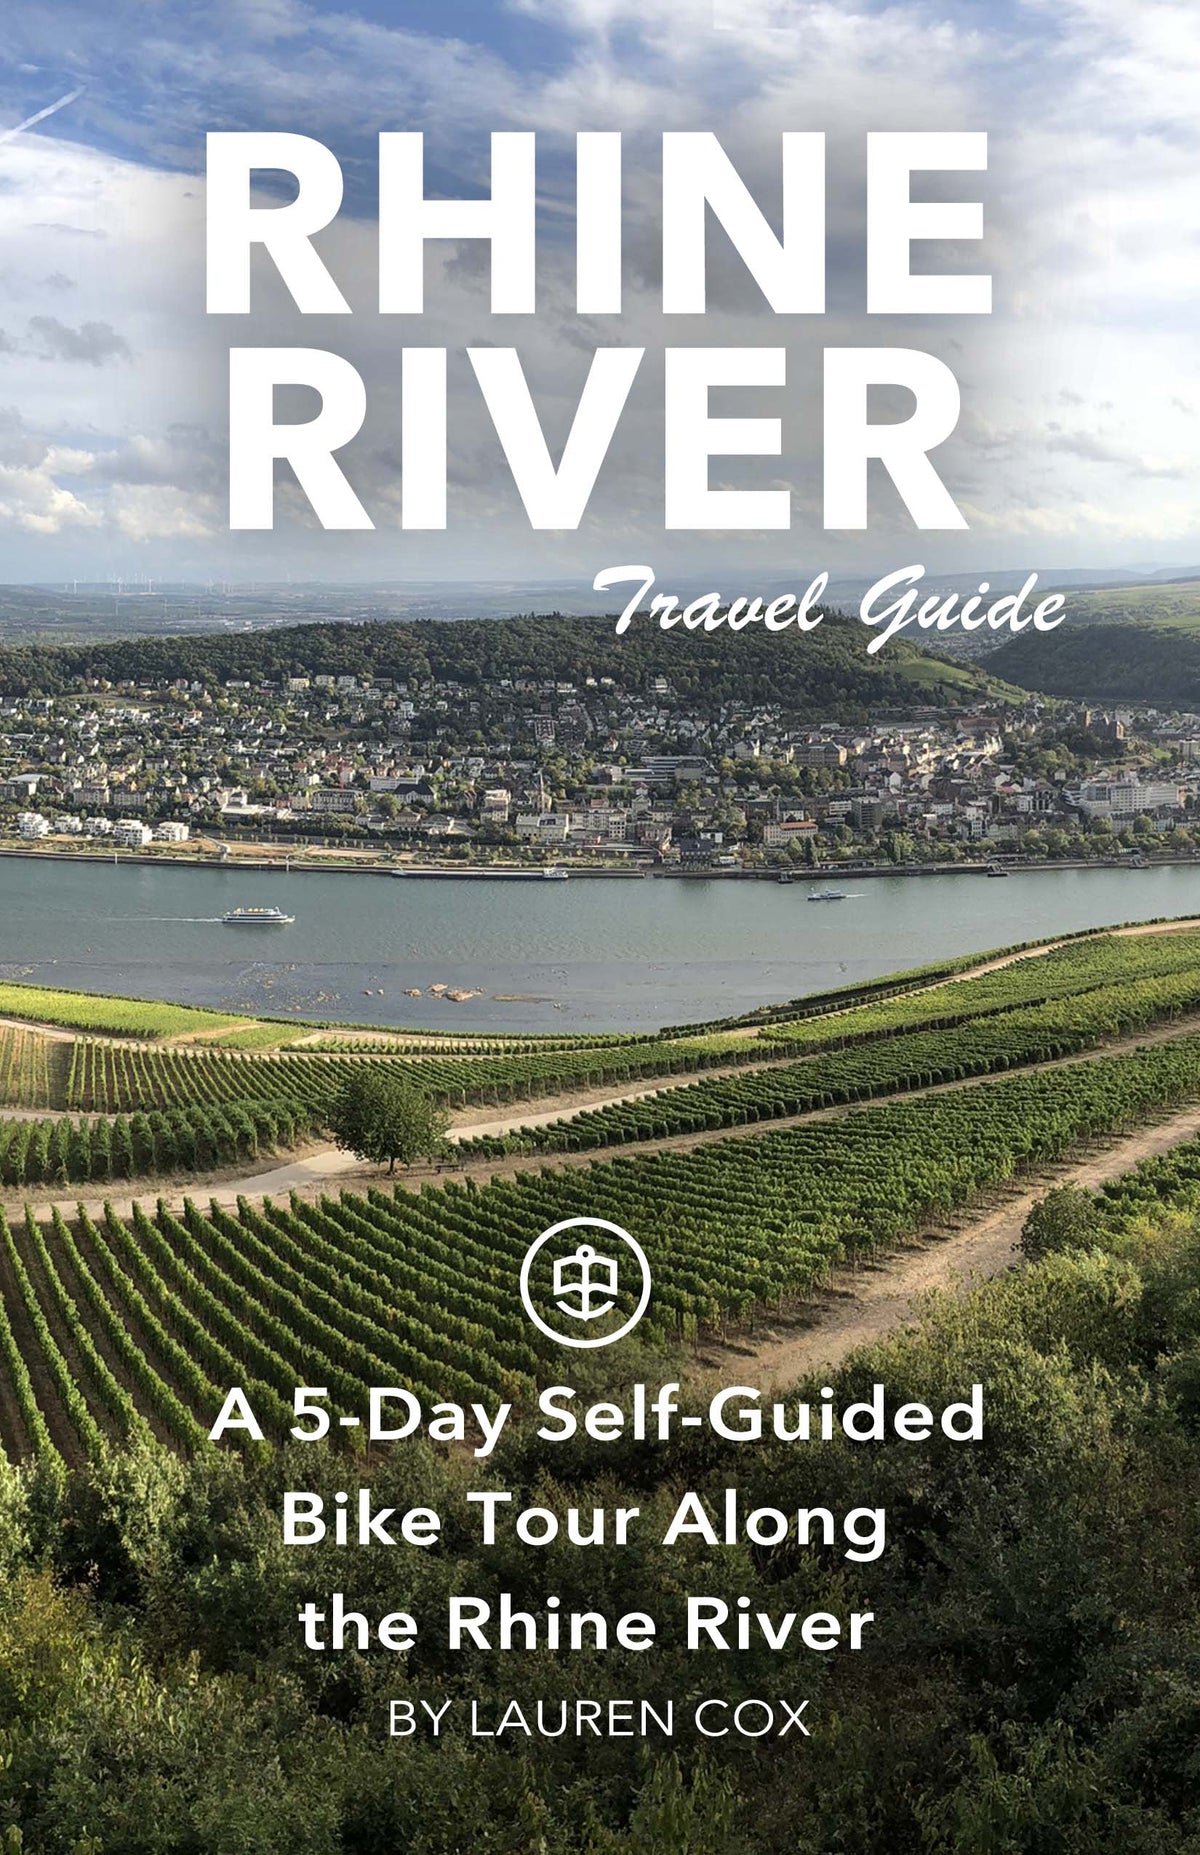 A 5-Day Self-Guided Bike Tour Along the Rhine River